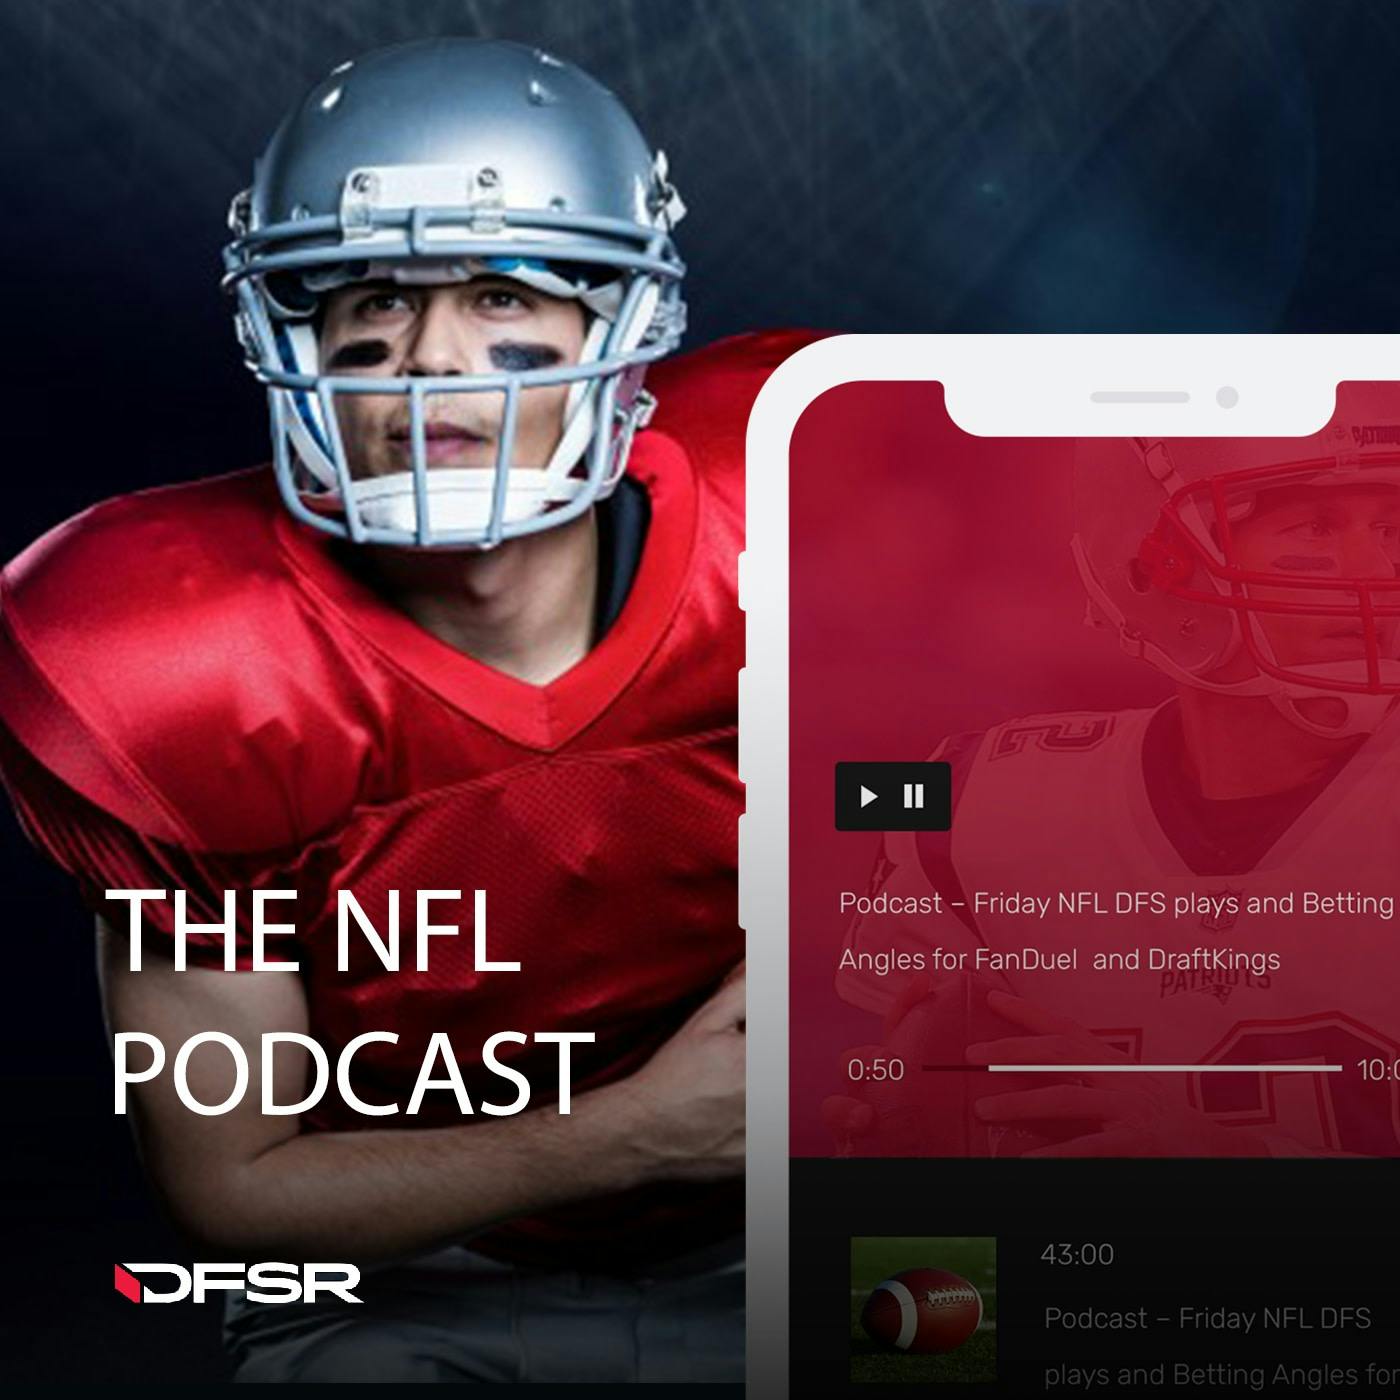 DFS NFL Podcast - Thanksgiving Day Plays for FanDuel and DraftKings